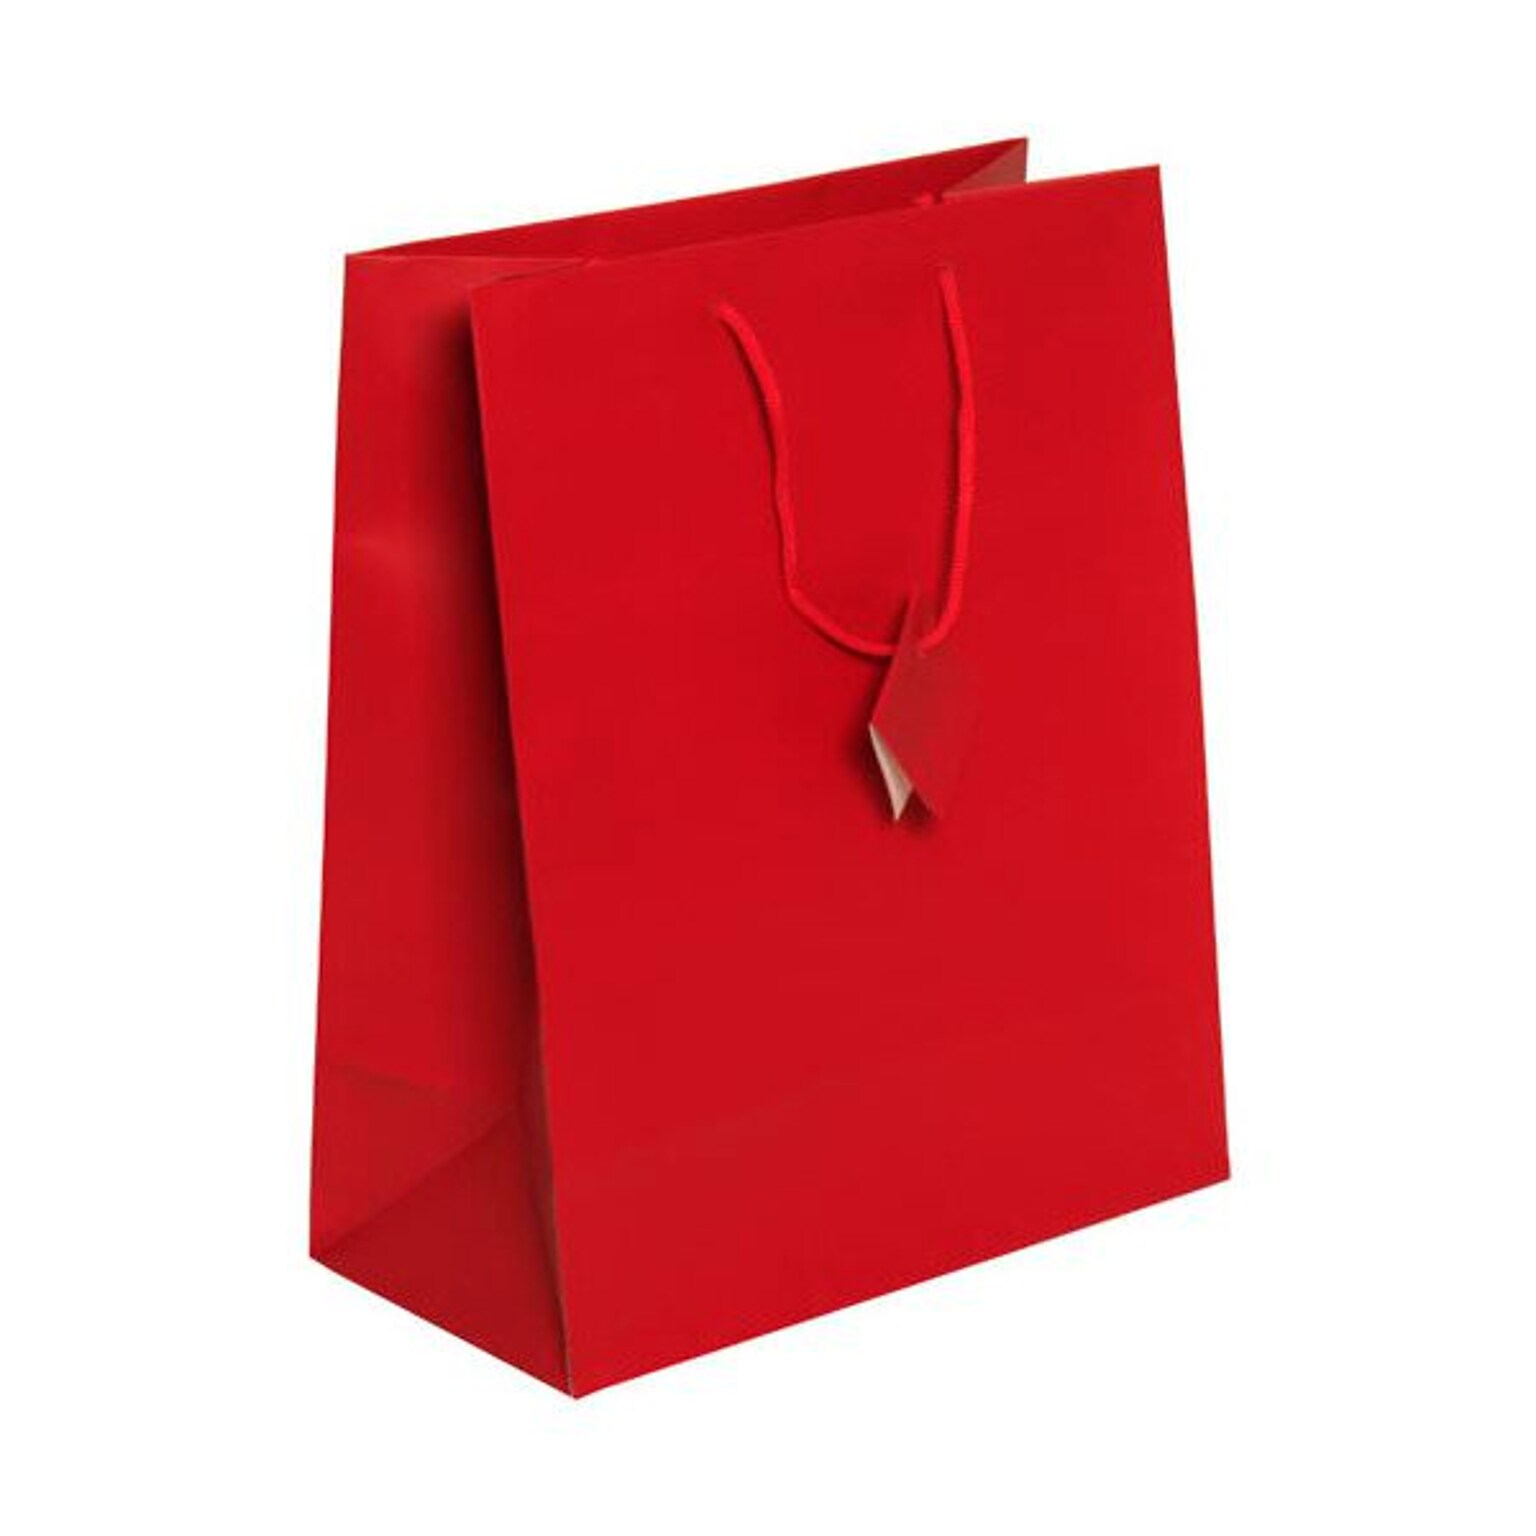 JAM Paper Matte Gift Bag with Rope Handles, Large, Red, 3 Bags/Pack (673MAREA)